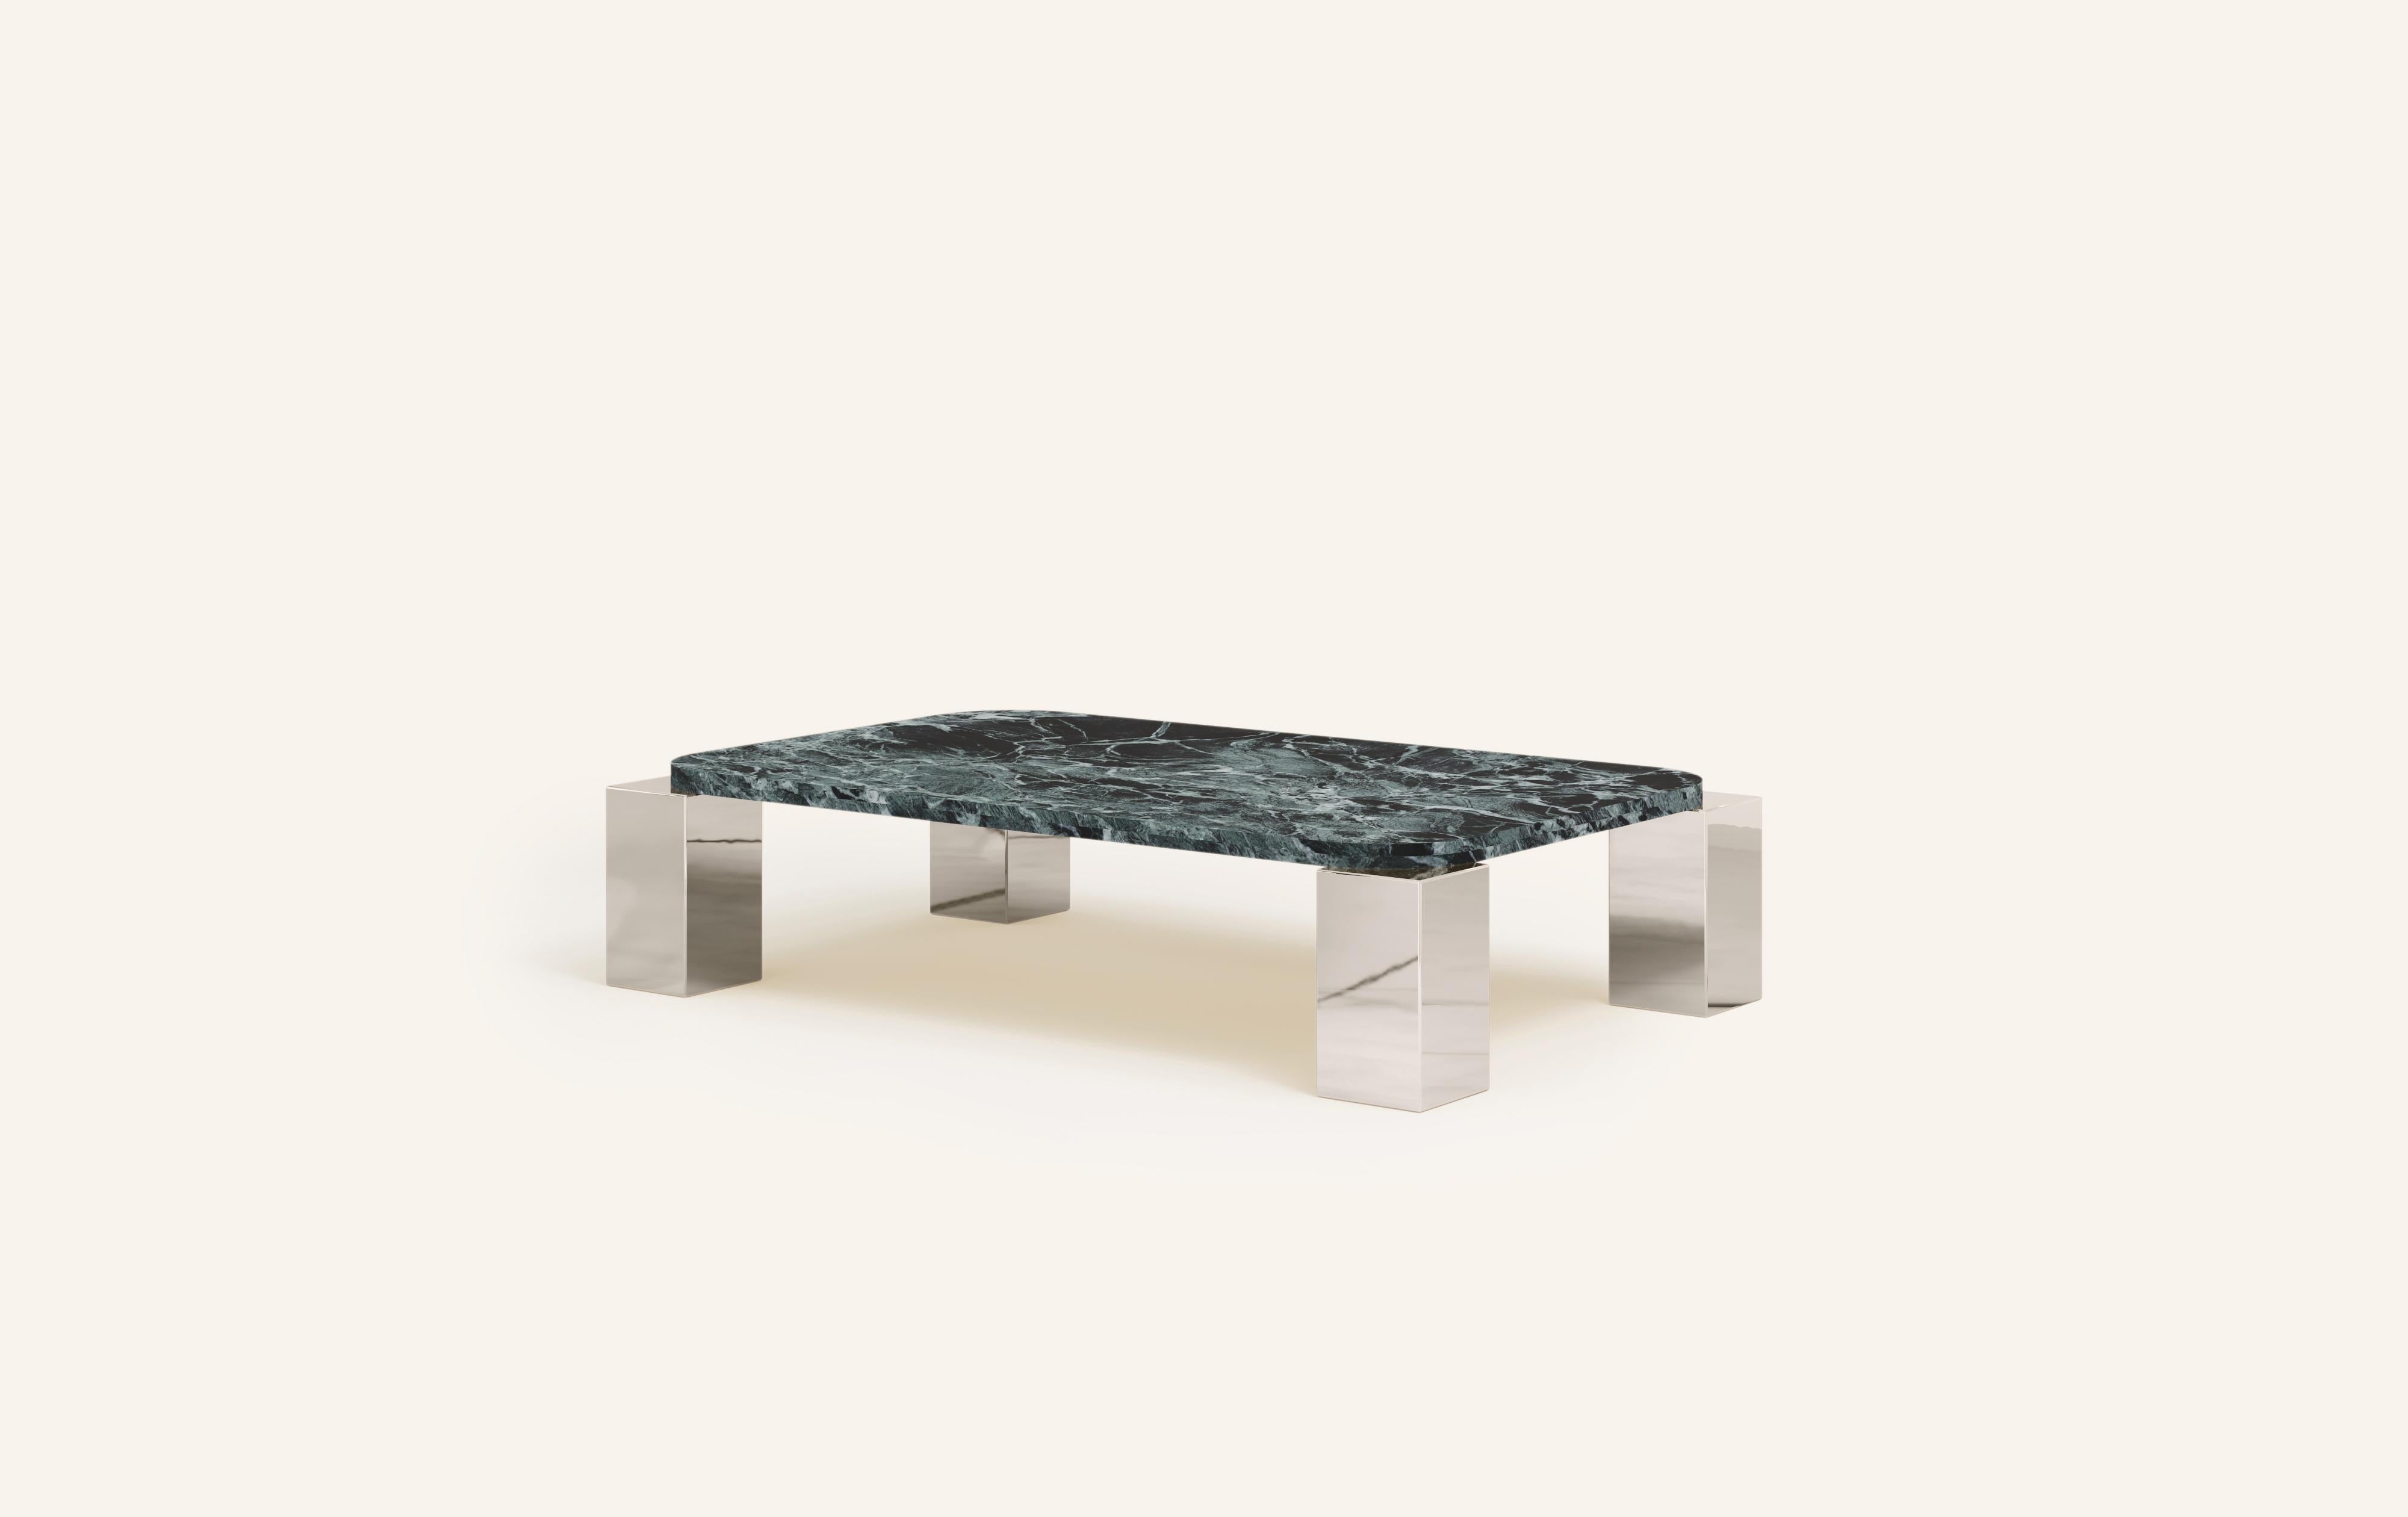 Organic Modern FORM(LA) Cubo Rectangle Coffee Table 74”L x 44”W x 14”H Verde Marble & Chrome For Sale